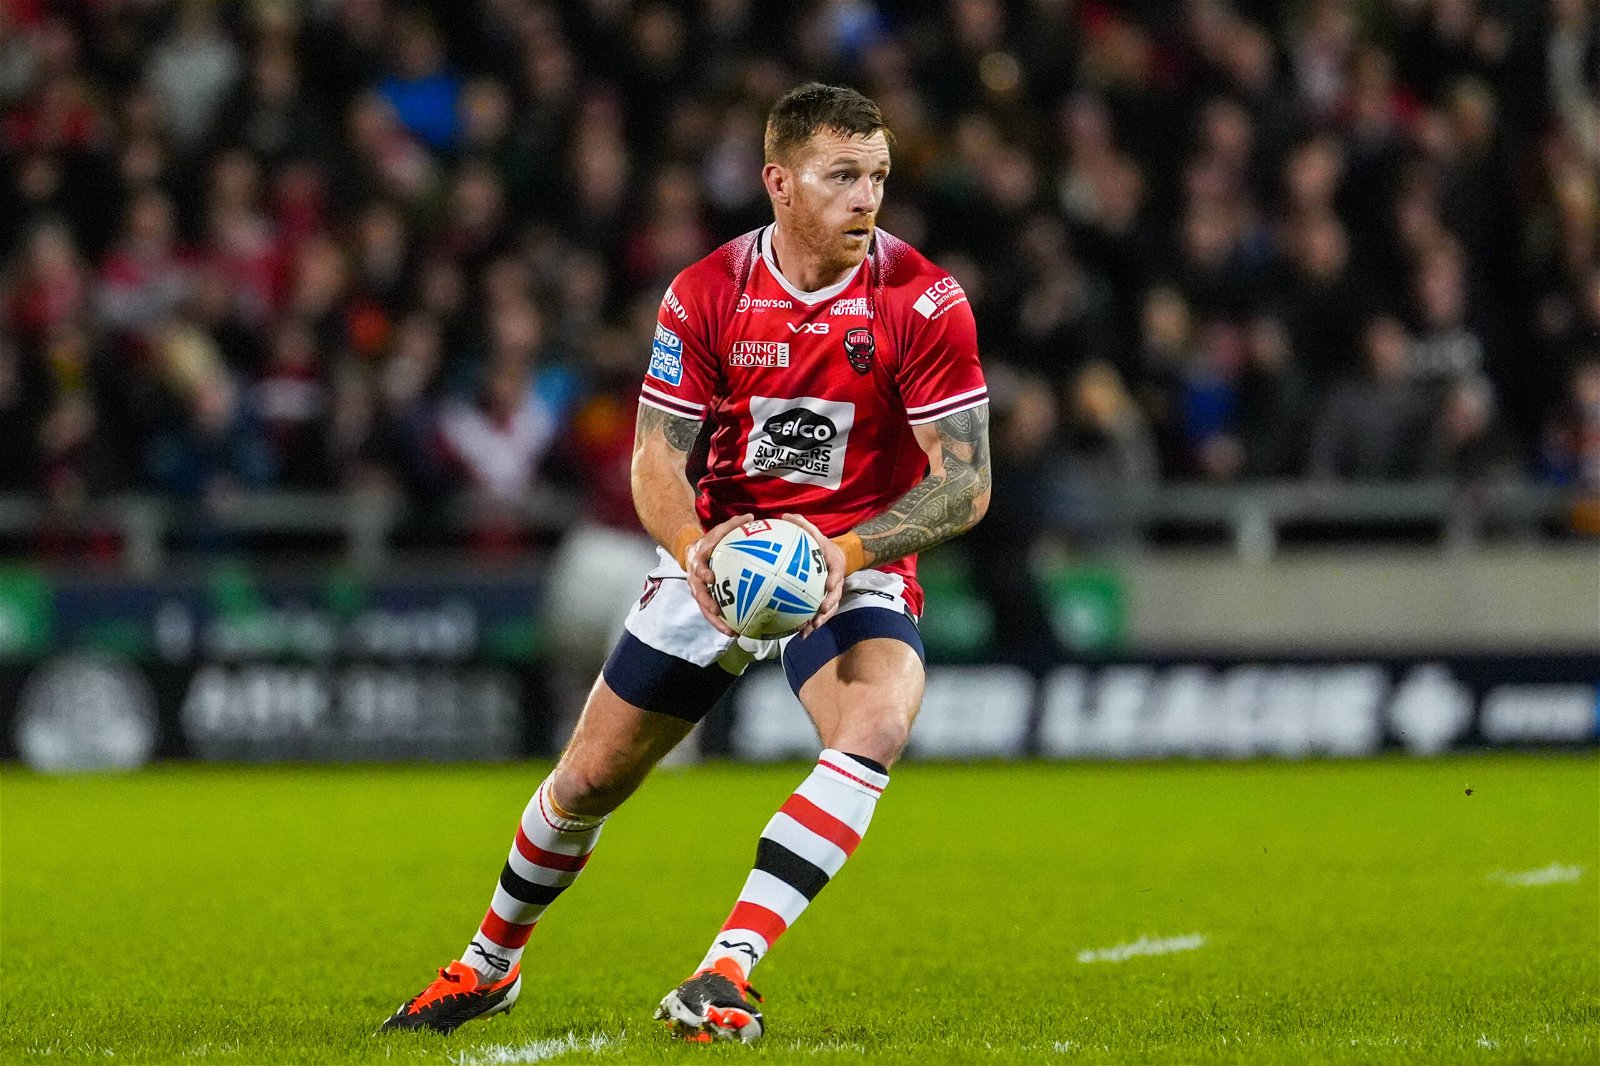 Marc Sneyd, playing for Salford, holds the ball. He tops the Man of Steel rankings